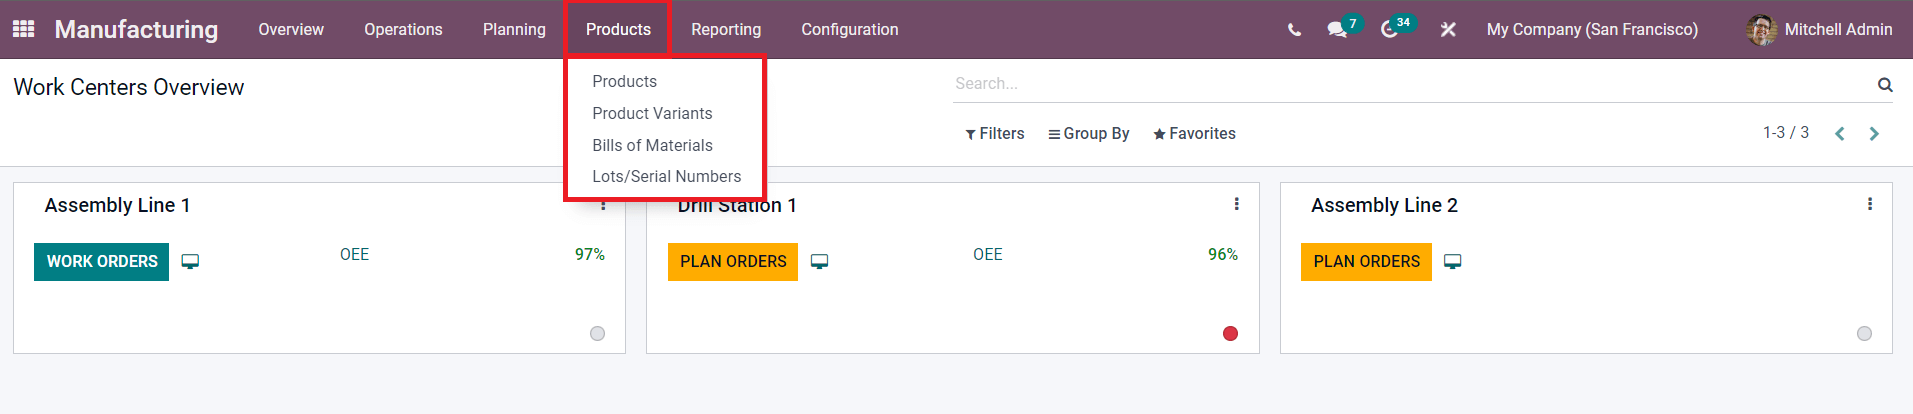 integration-of-inventory-mrp-modules-in-odoo-15-erp-cybrosys